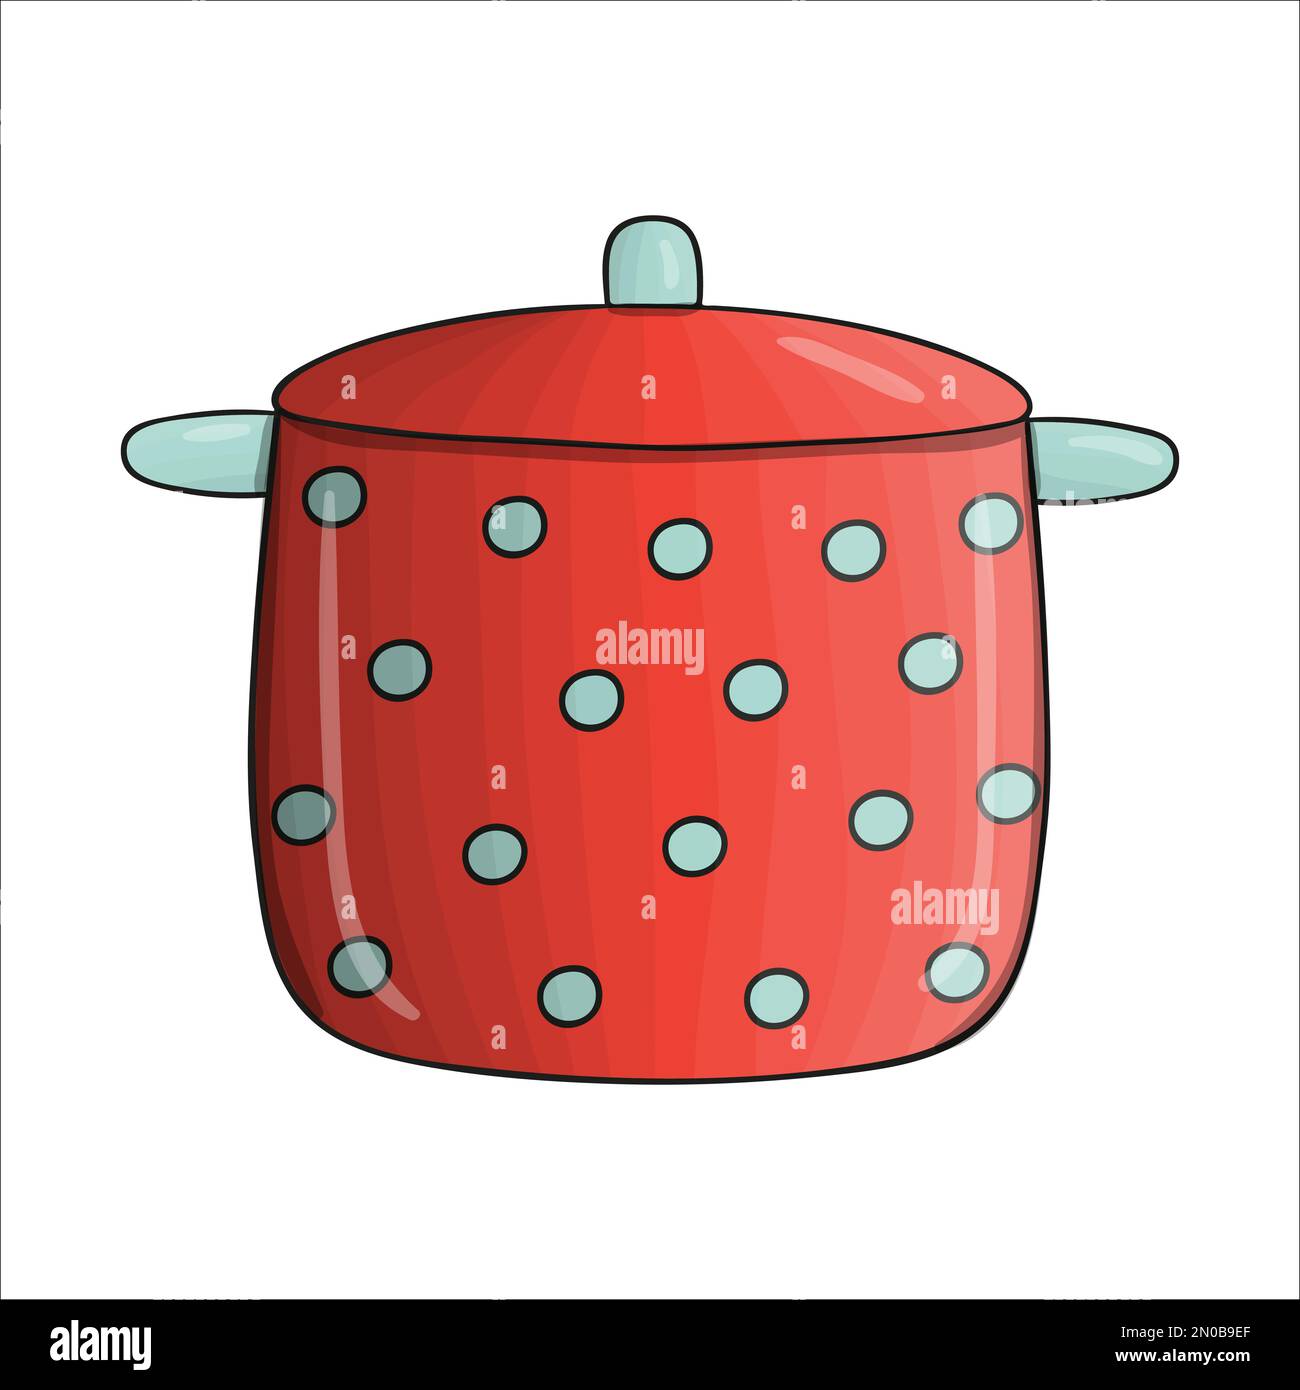 https://c8.alamy.com/comp/2N0B9EF/vector-red-polka-dot-pot-kitchen-tool-icon-isolated-on-white-background-cartoon-style-cooking-equipment-crockery-vector-illustration-2N0B9EF.jpg